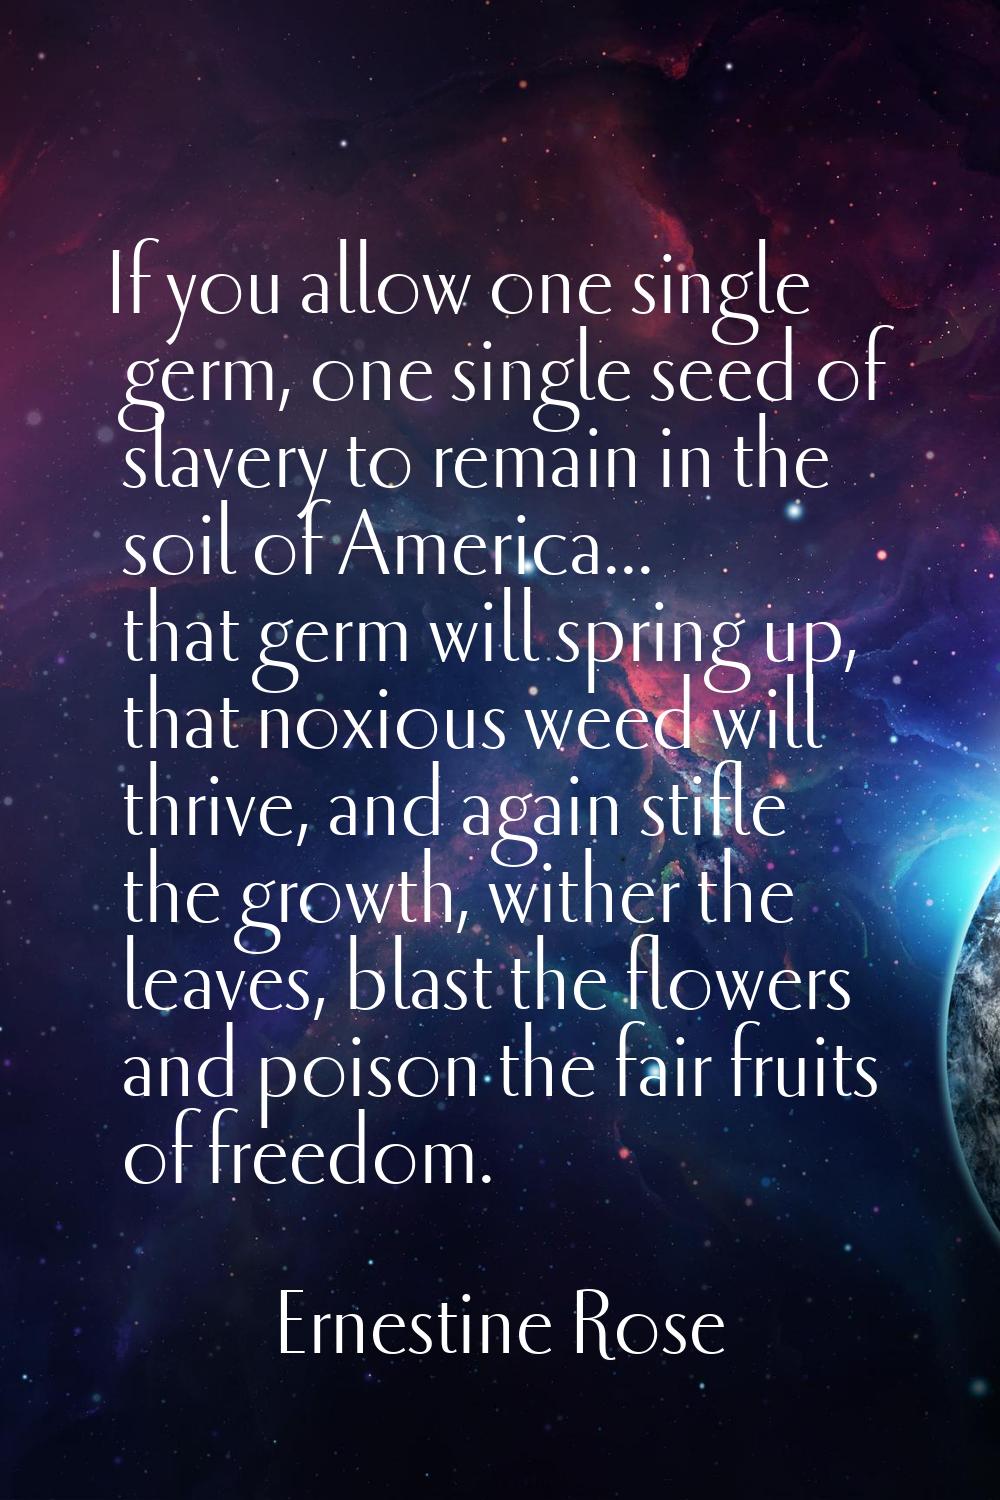 If you allow one single germ, one single seed of slavery to remain in the soil of America... that g